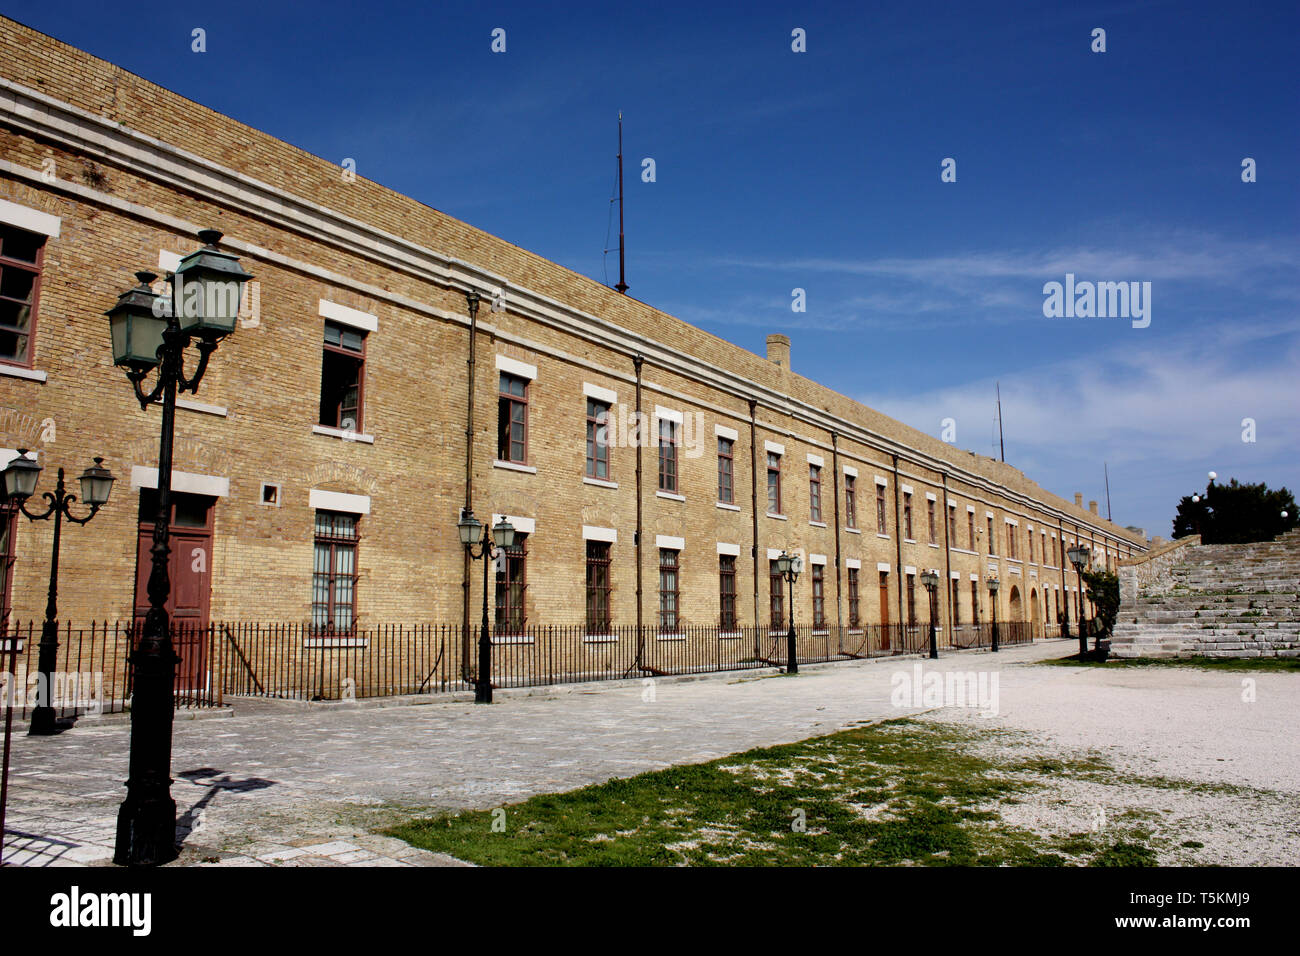 Some of the administrative buildings in the old fort near to the old town of Corfu, one of the ionian islands of greece Stock Photo